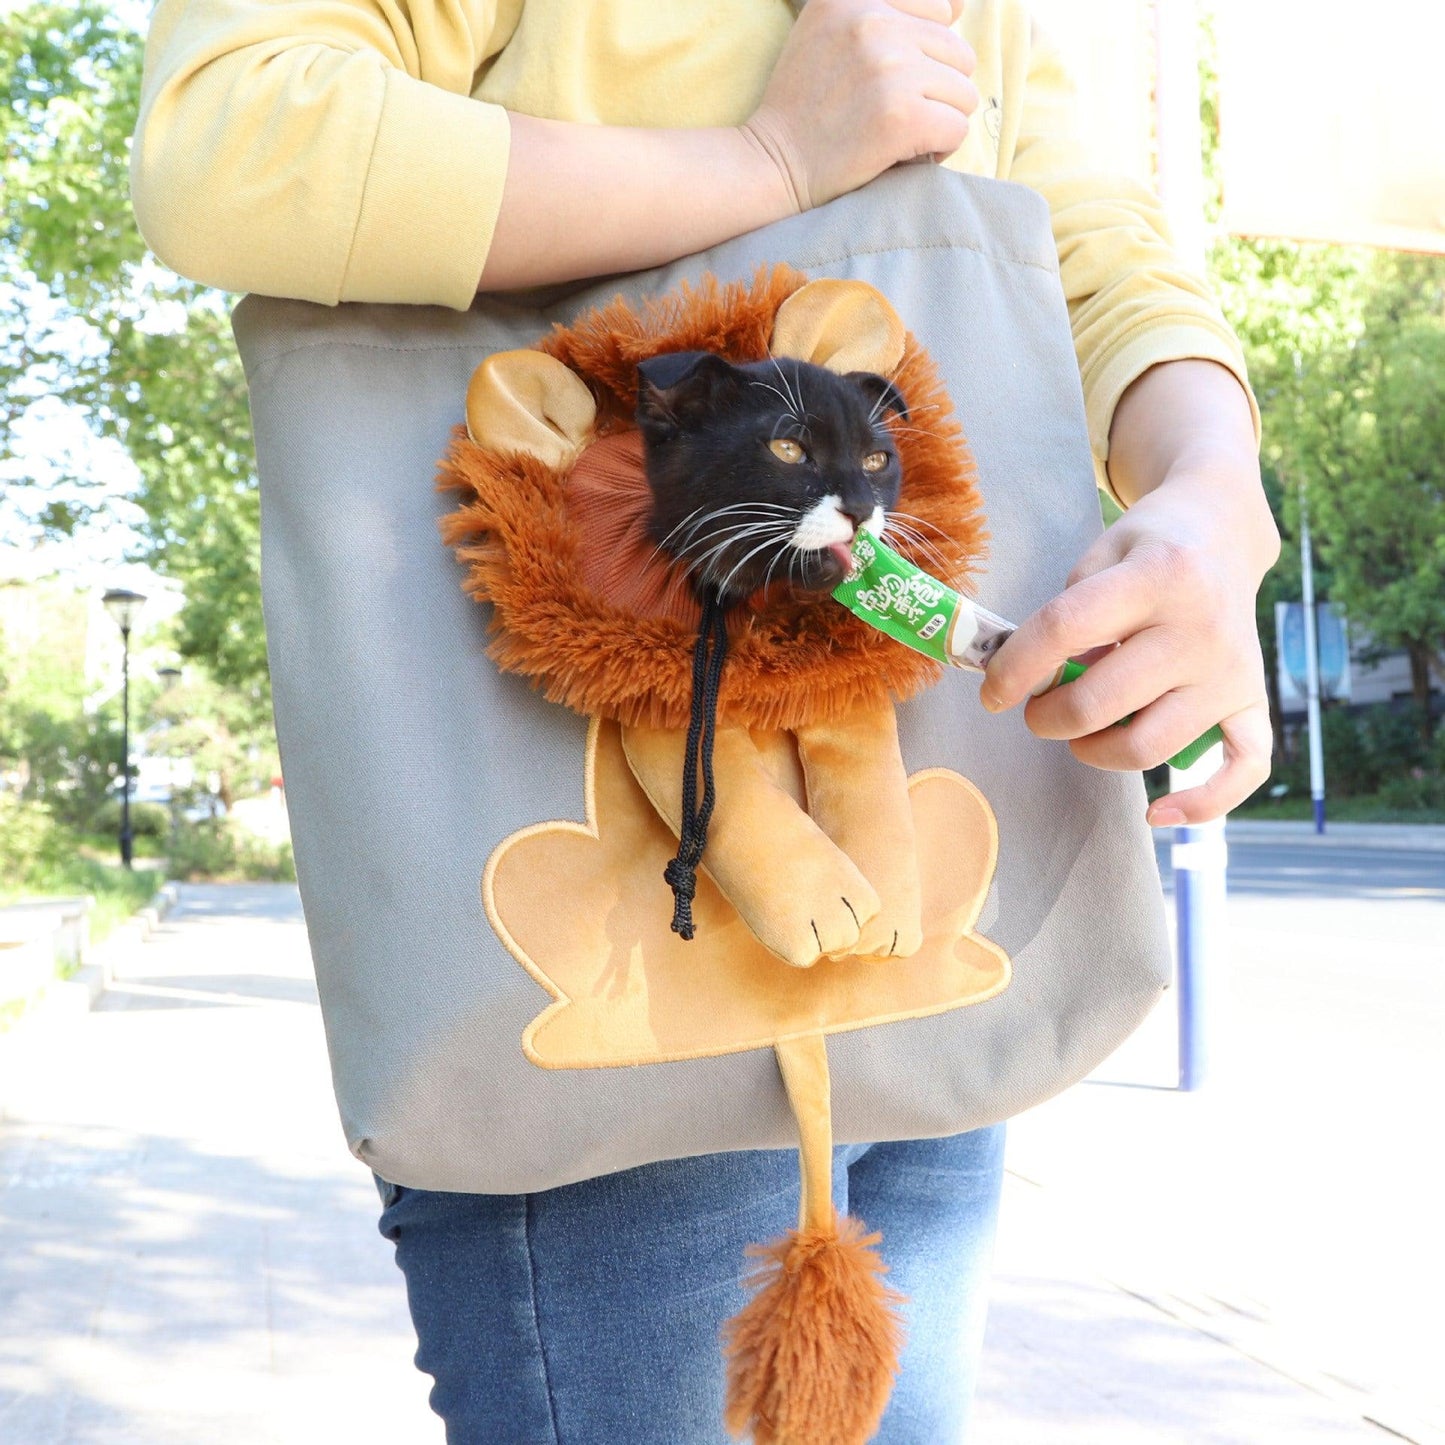 Soft Pet Carriers Lion Design Portable Breathable Bag Cat Dog Carrier Bags Outgoing Travel Pets Handbag With Safety Zippers - Dog Hugs Cat